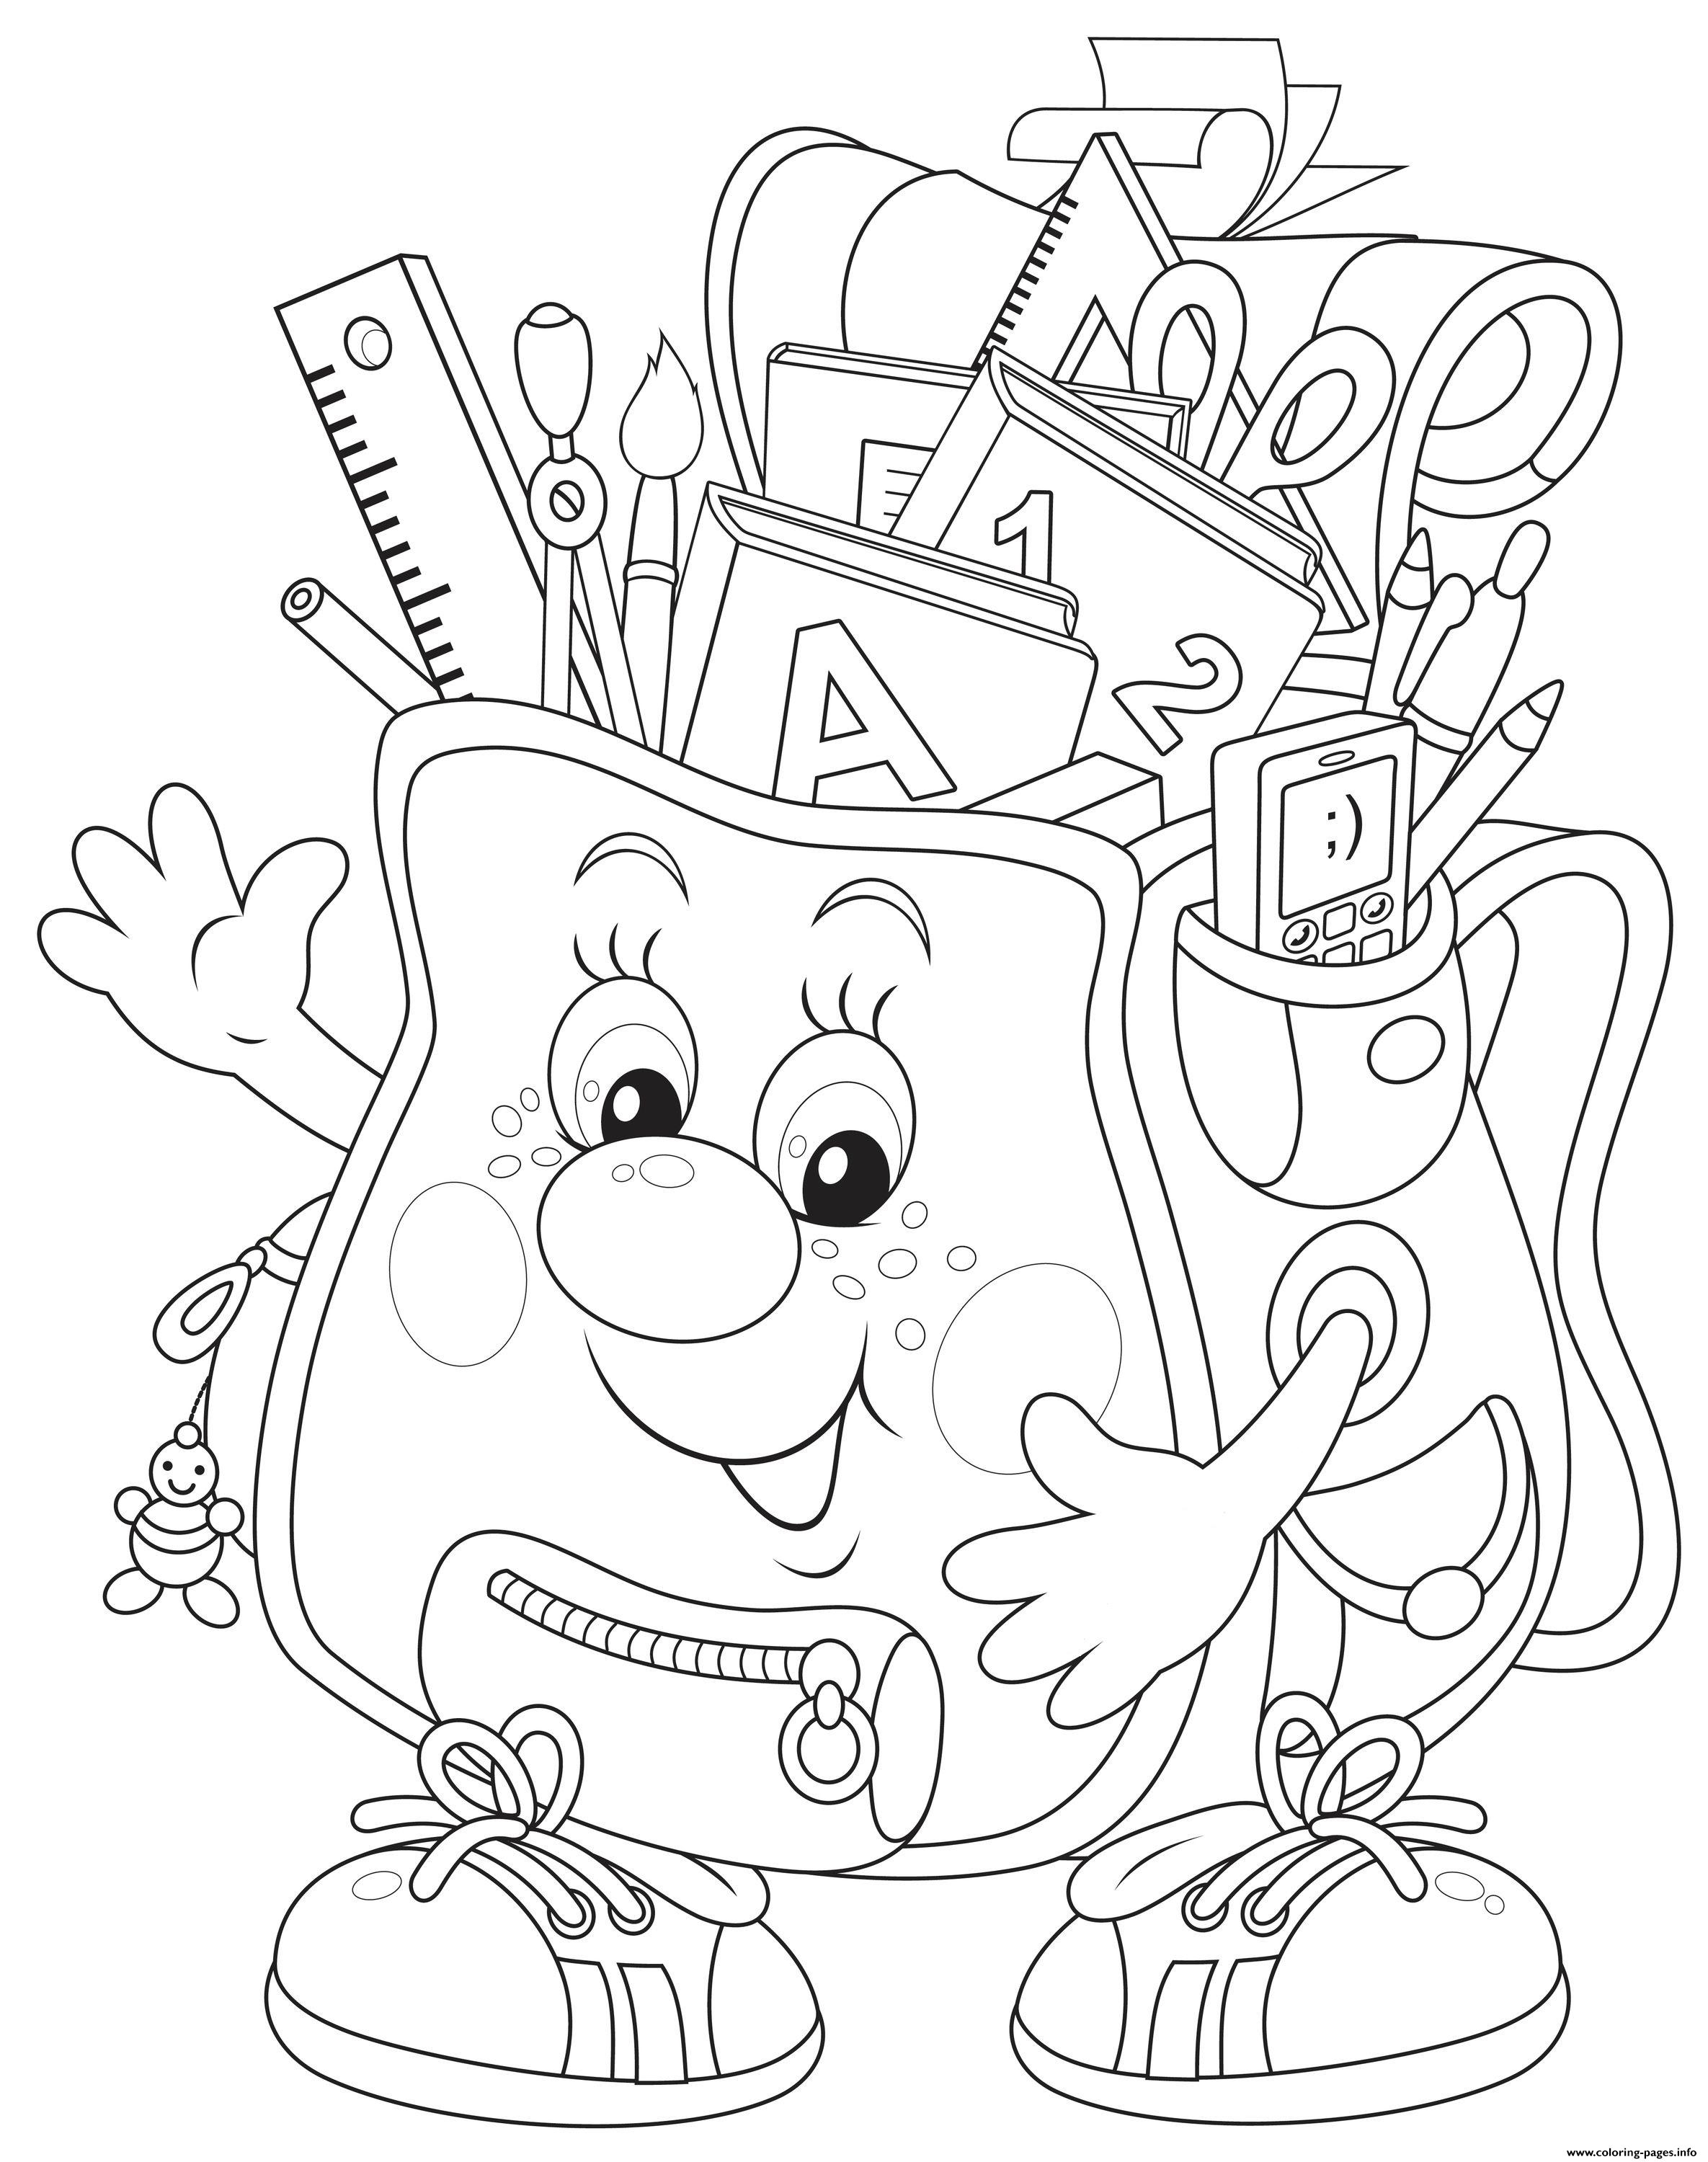 School Bus Coloring Page Coloring Pages Printable Magic School Bus Coloring Sheets Back To